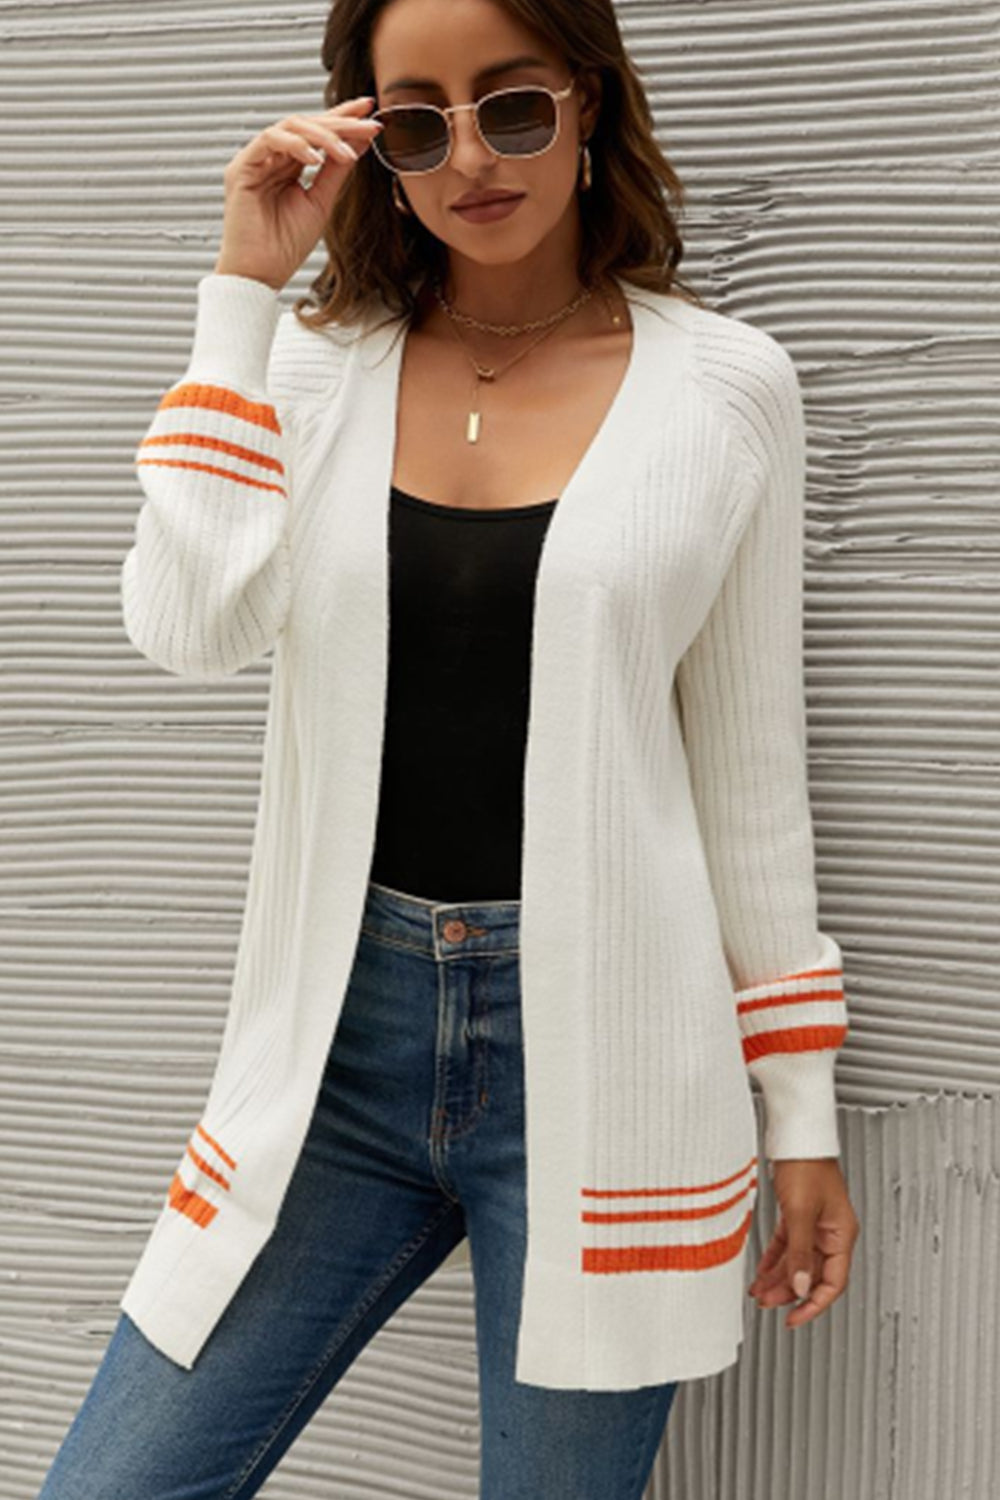 Women Casual striped knitted Cardigan Sweater Coat